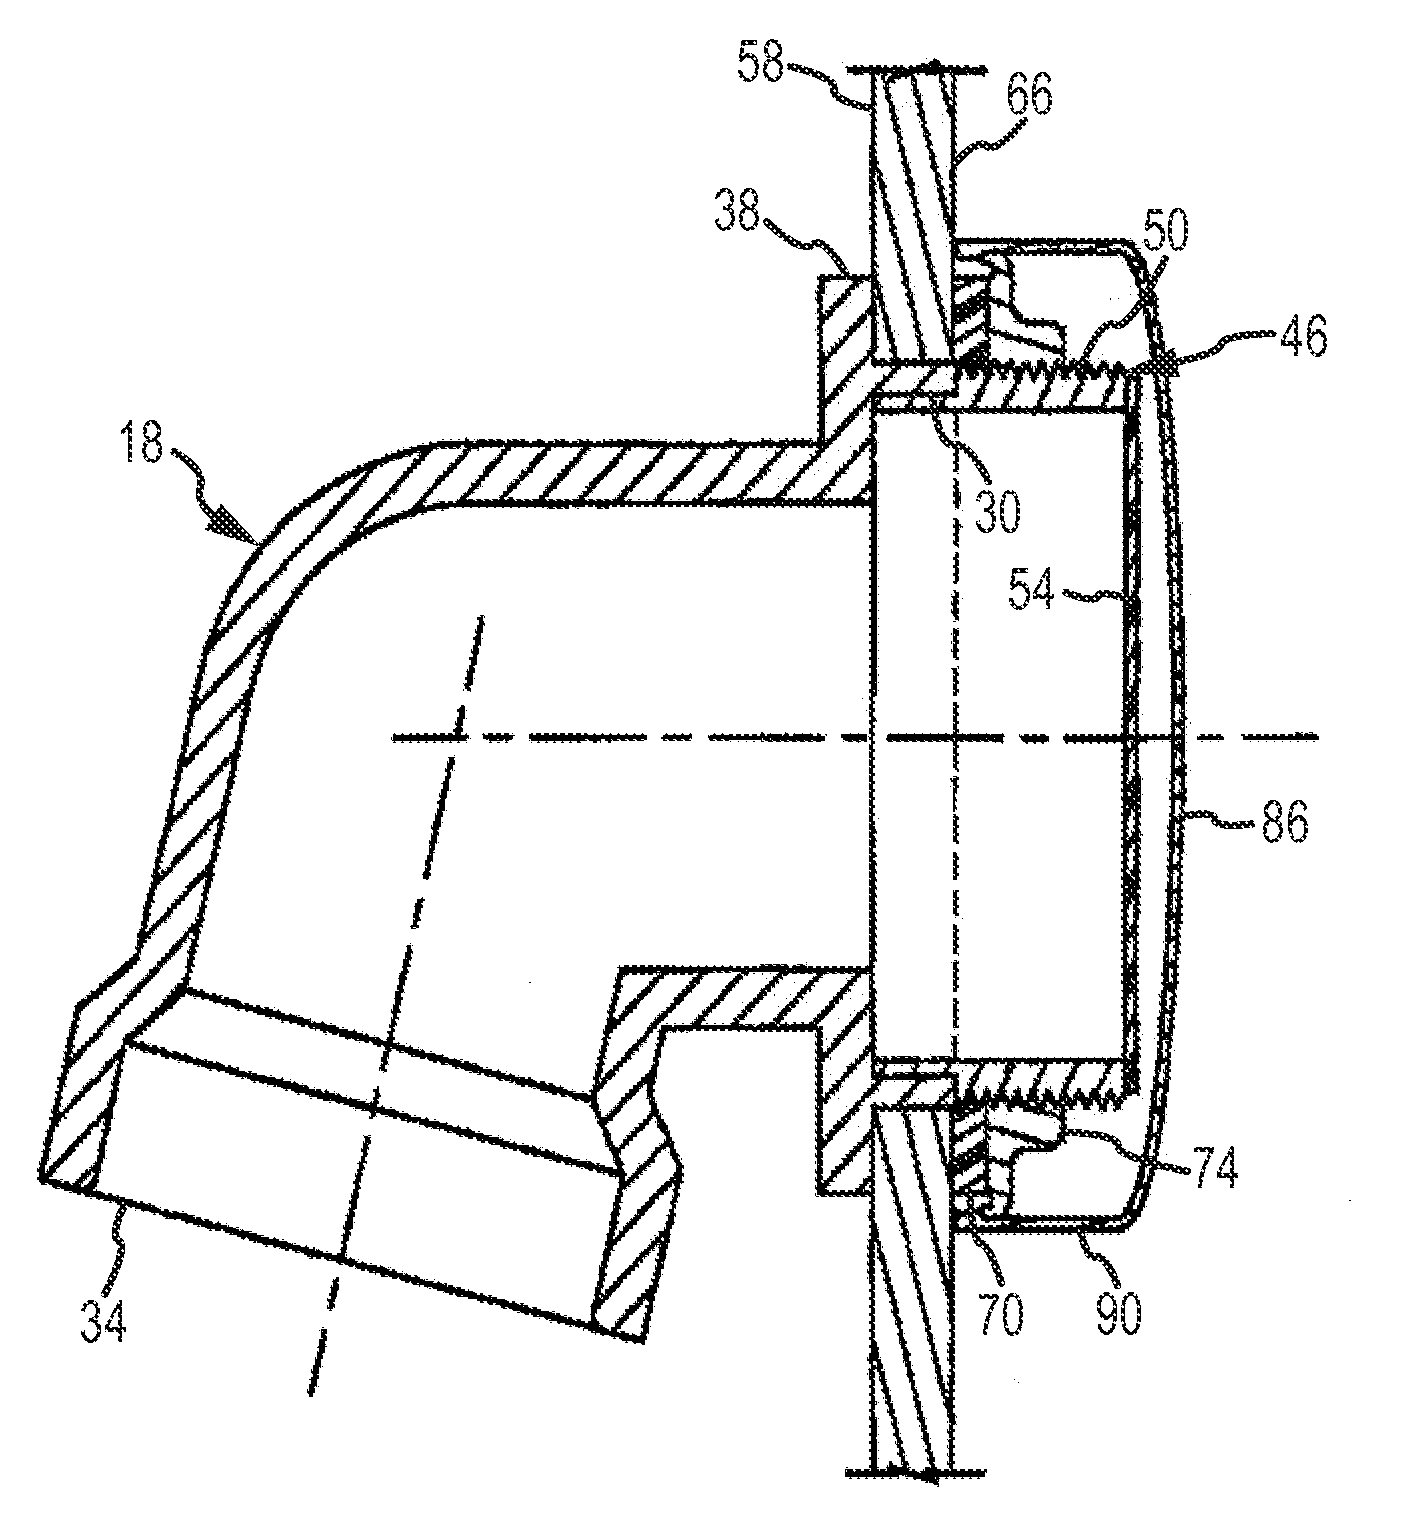 Method and associated apparatus for assembling and testing a plumbing system